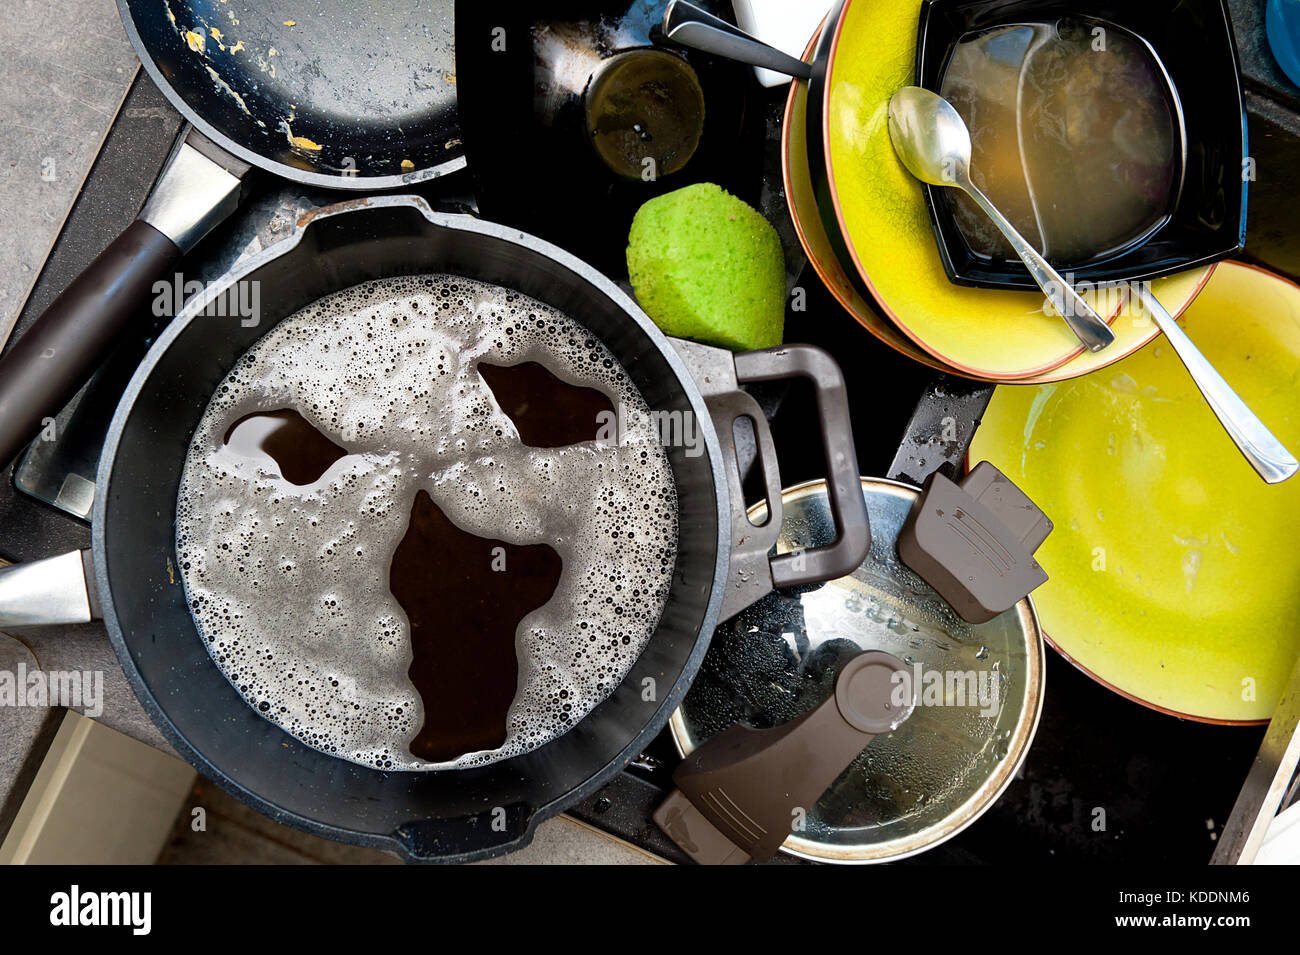 A pile of dirty dishes in the sink and screaming face made of soap foam Stock Photo